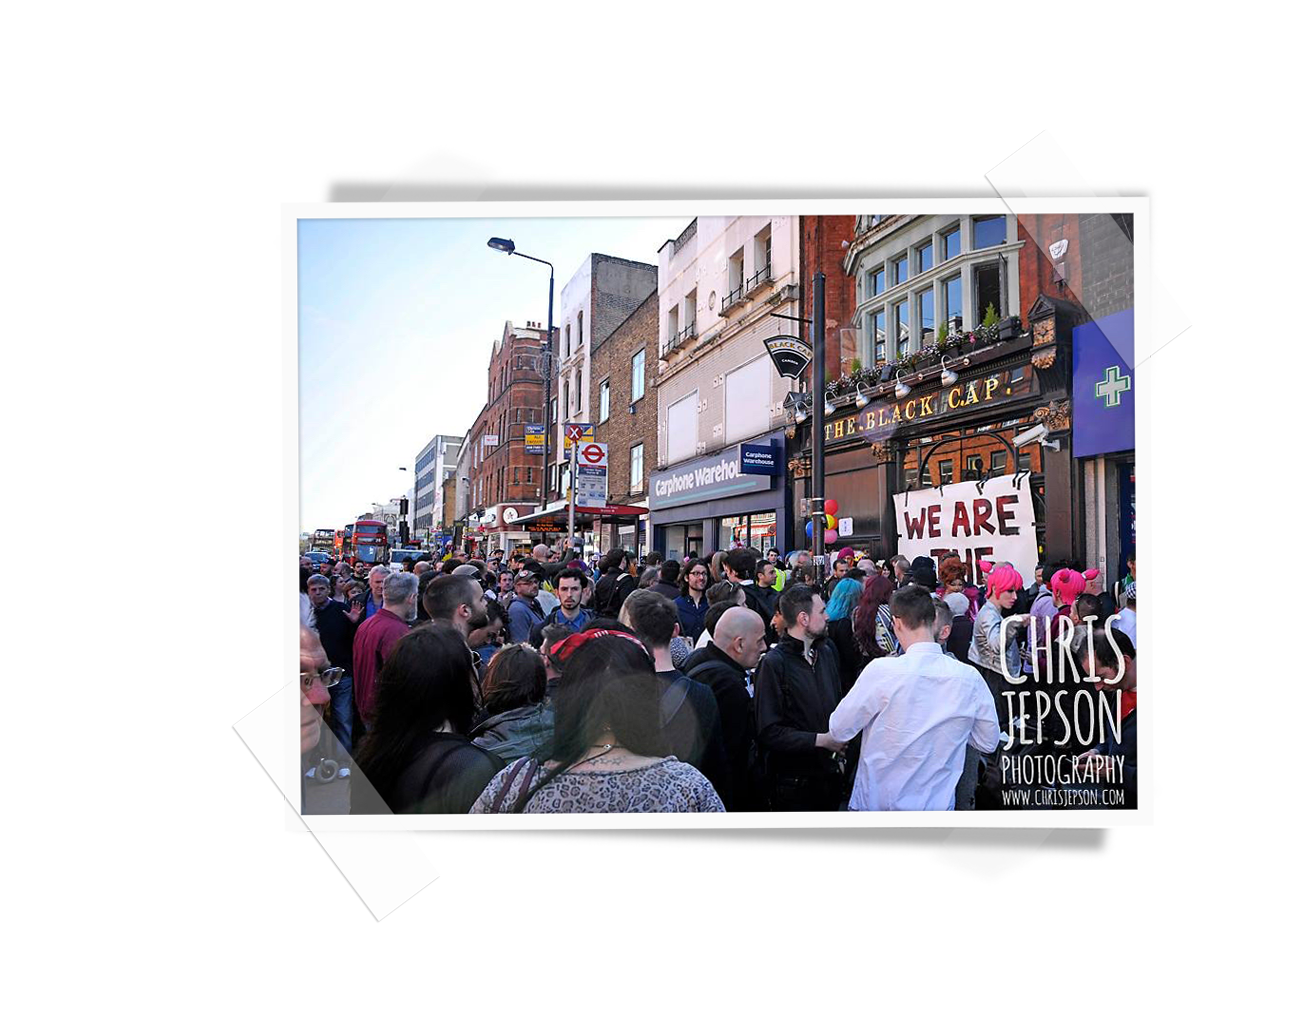 A street full of people in front of the Black Cap in Camden London